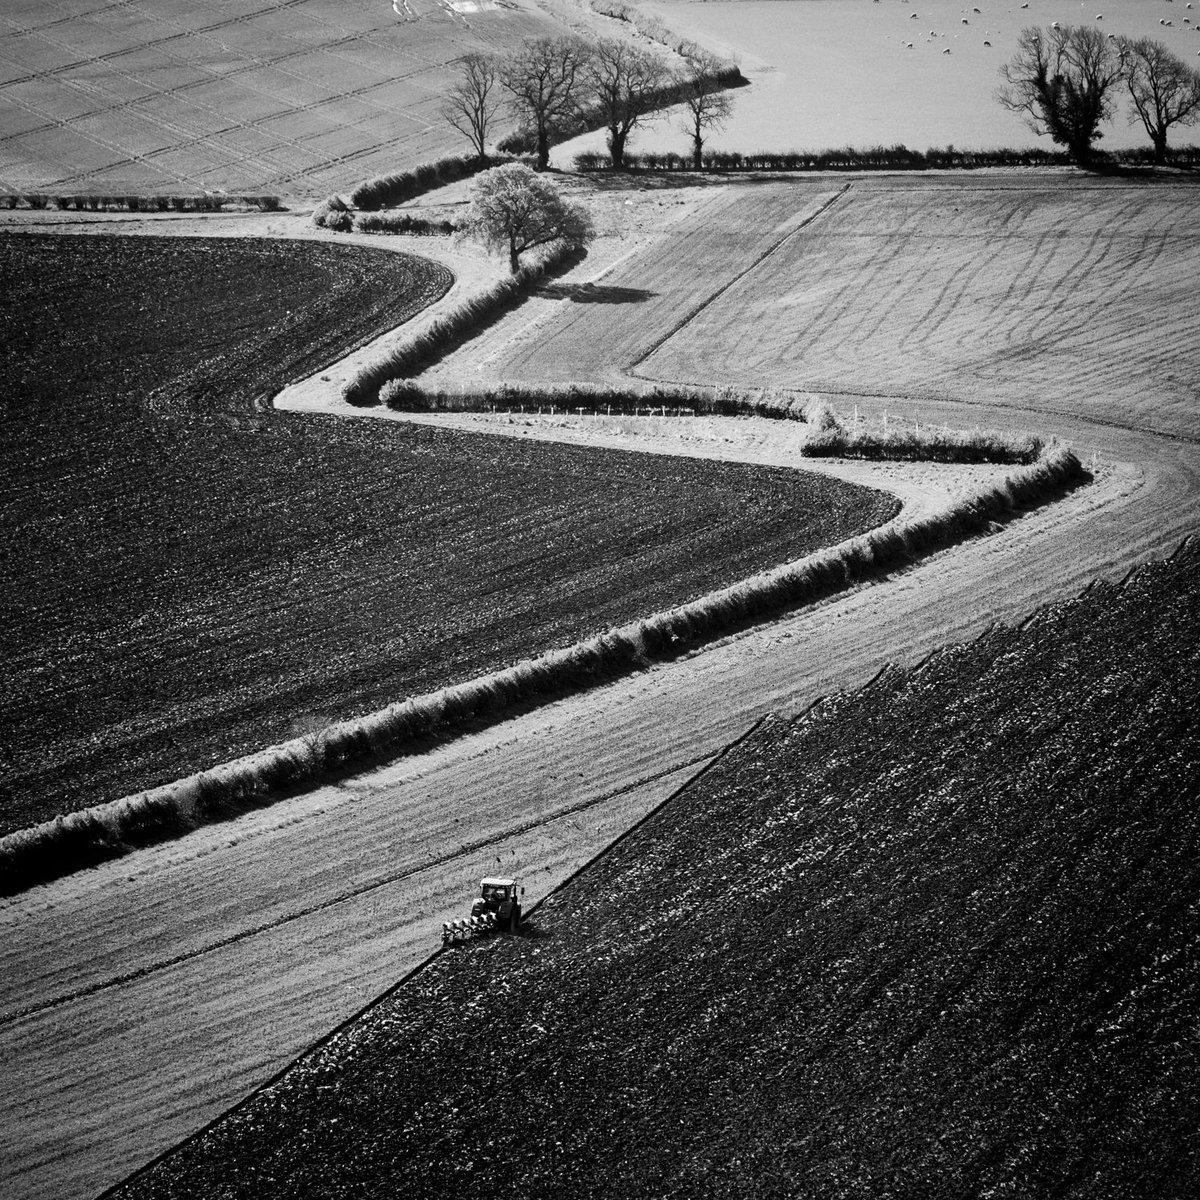 Ploughing the zig-zag fields. Taken from the top of Tan Hill in Wiltshire. OM-1 and 40-150f4.